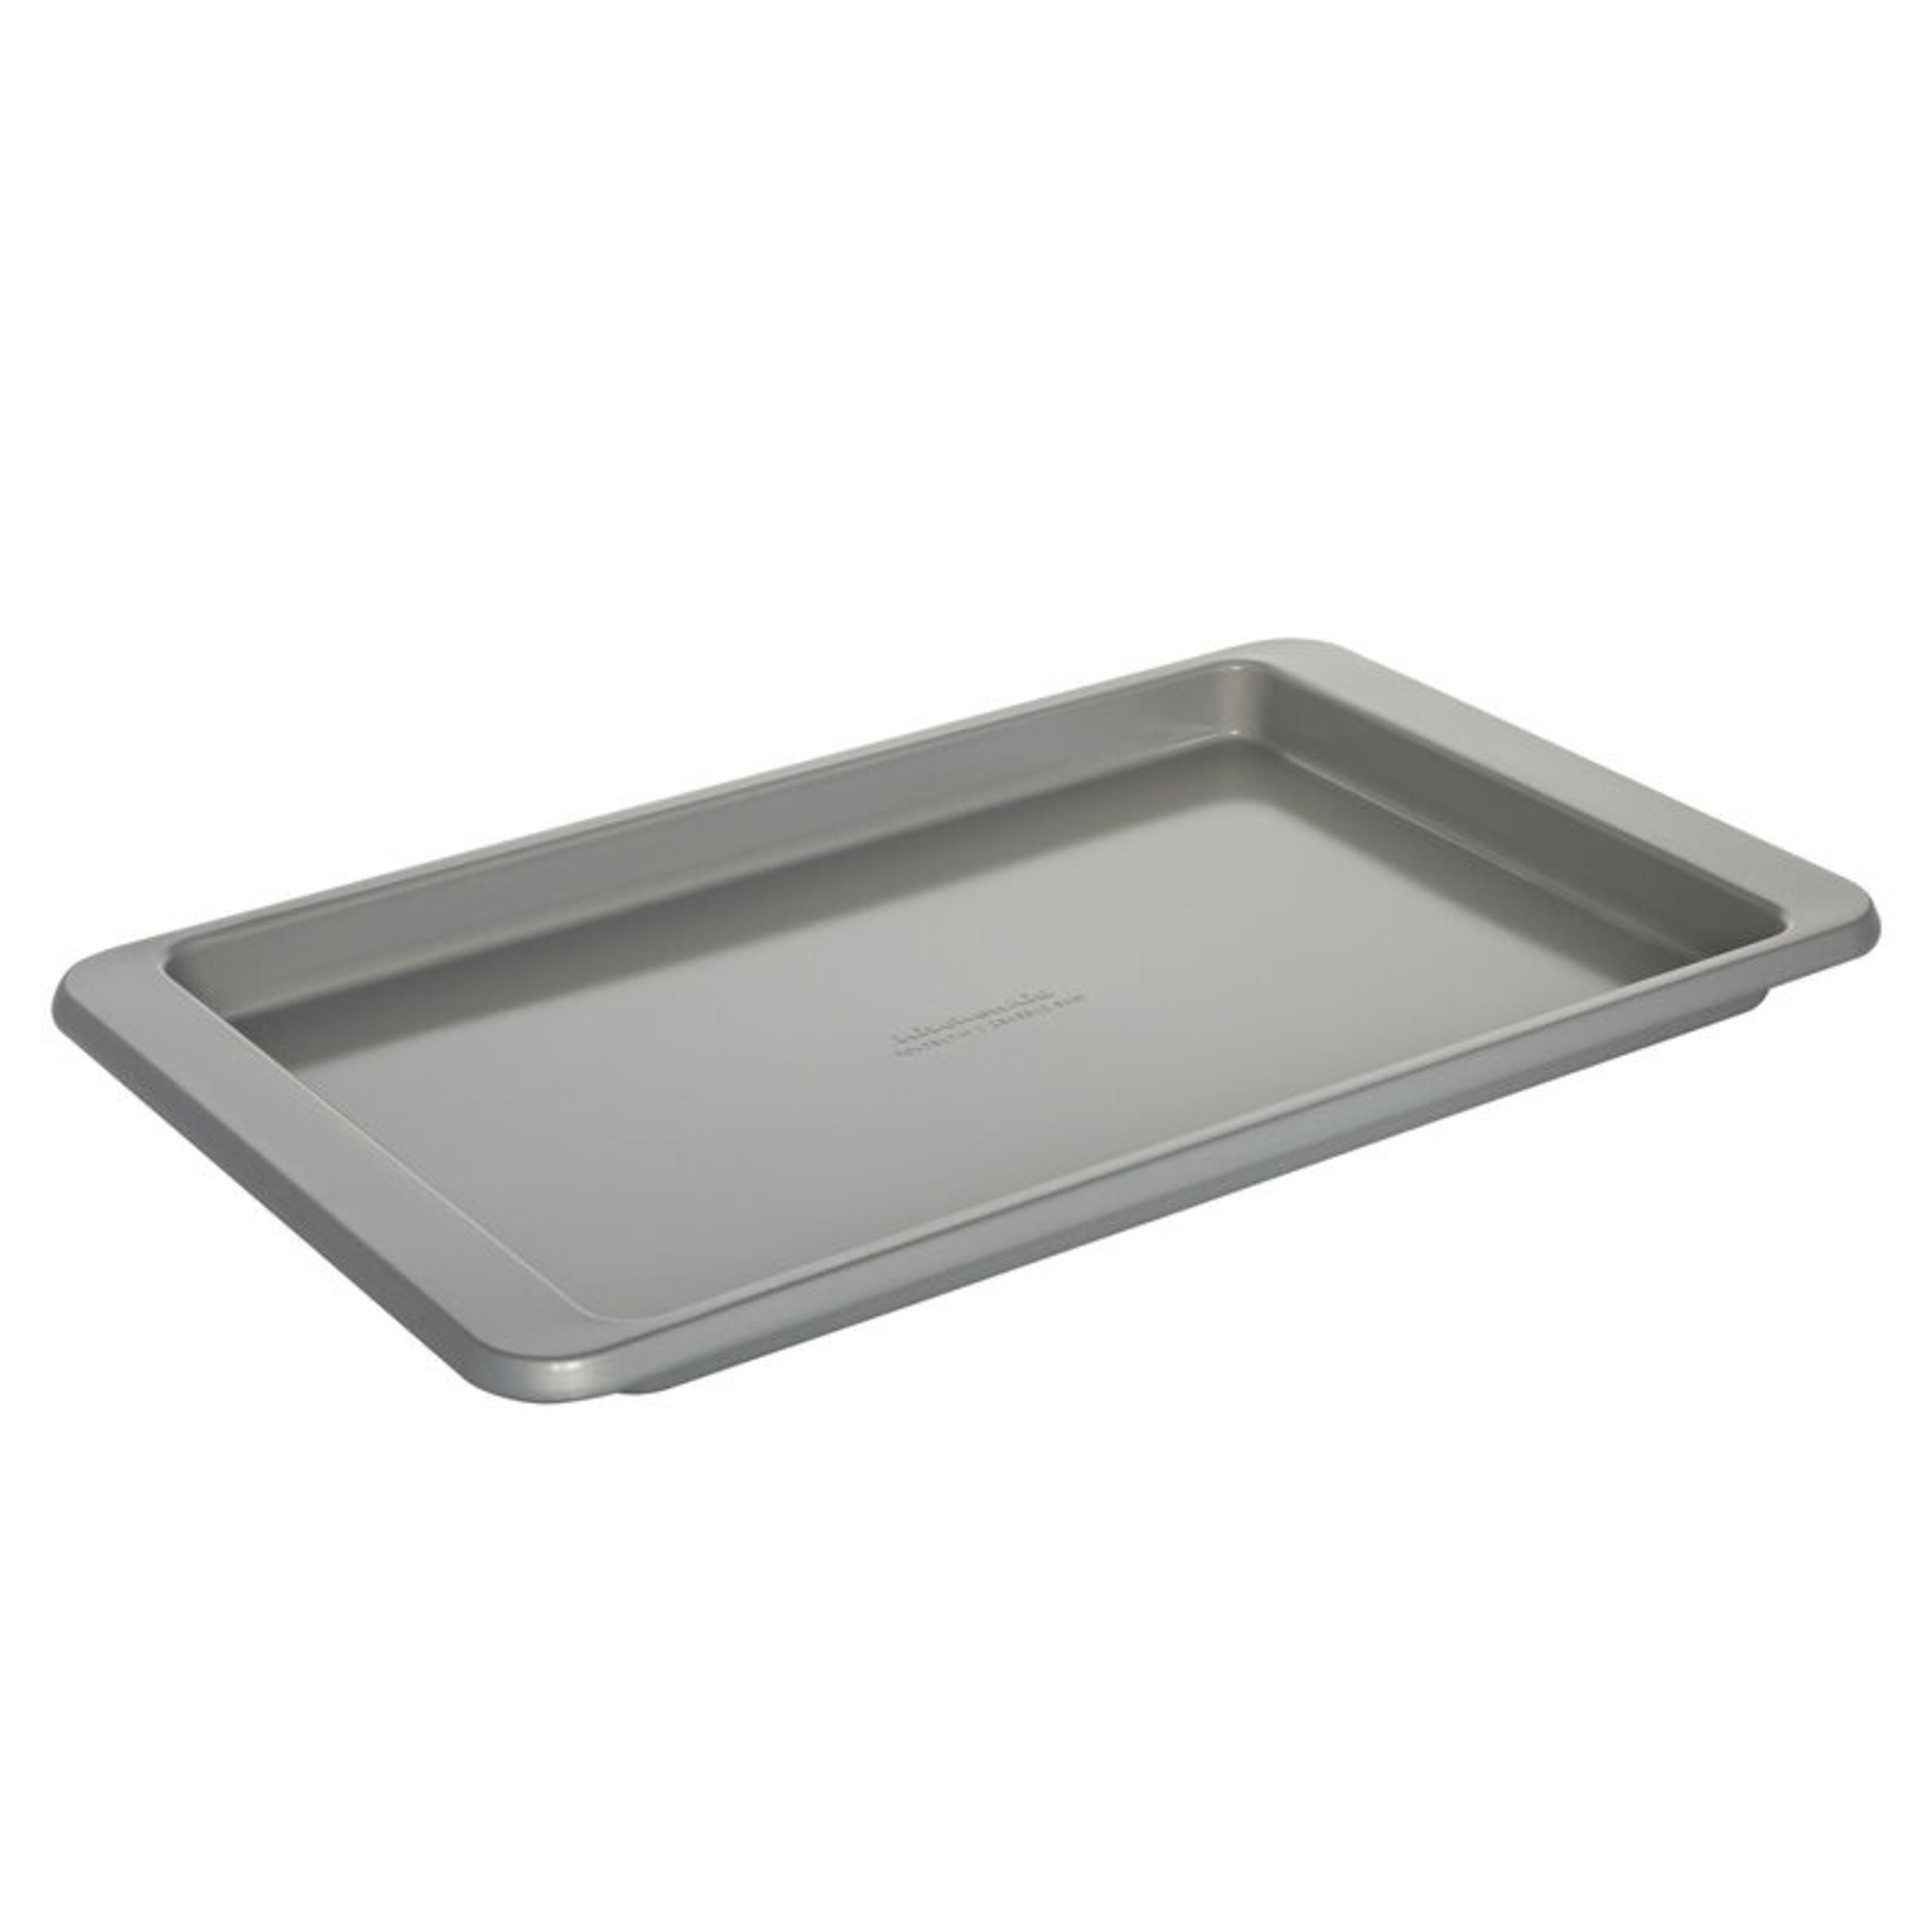 KitchenAid Nonstick 10 x 15 in Baking Sheet with Extended Handles for Easy  Grip, Aluminized Steel to Promoted Even Baking, Dishashwer Safe,Contour